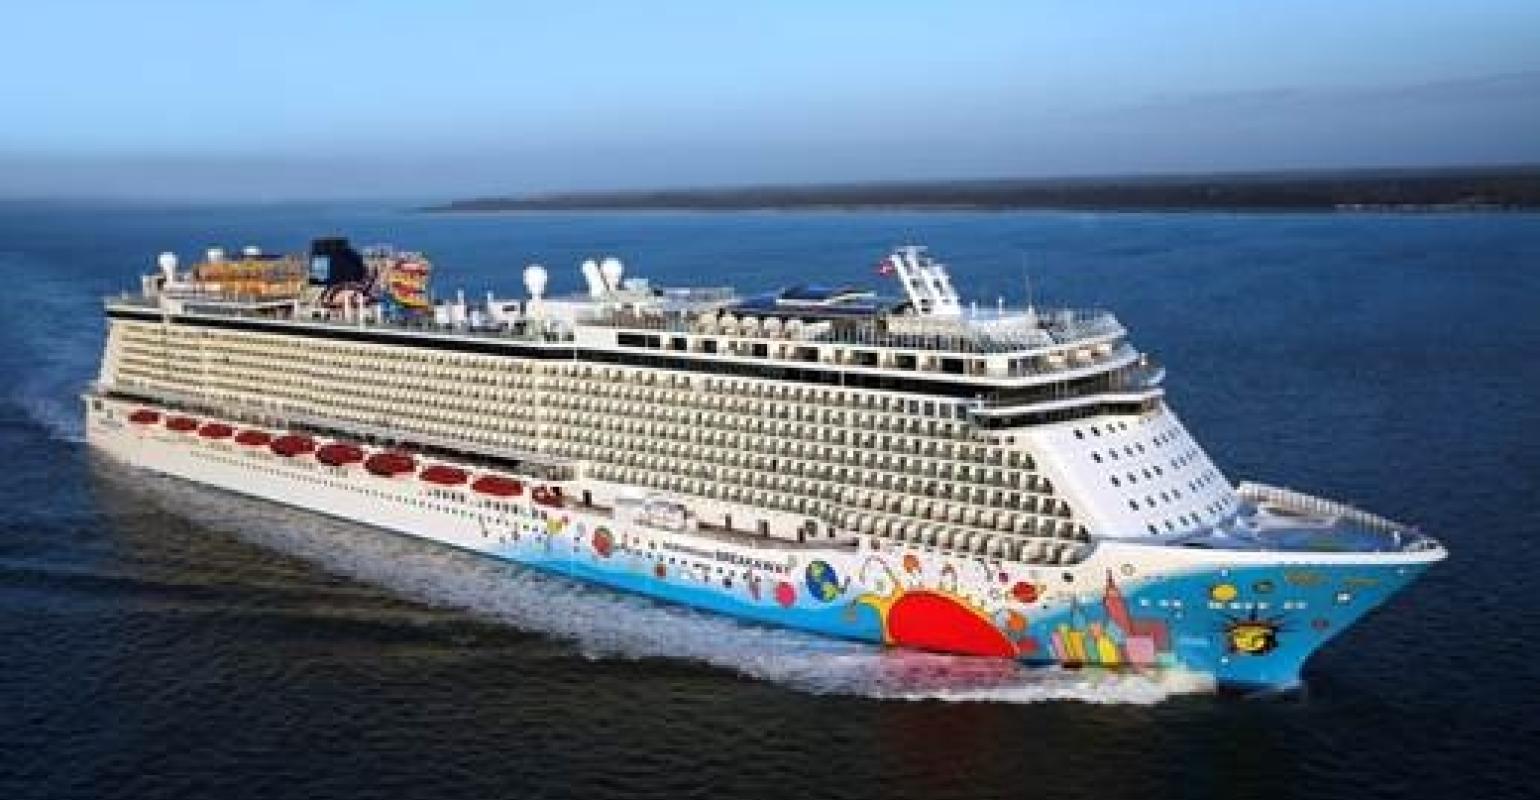 Two Floridabased NCL ships will end their cruises in New Orleans